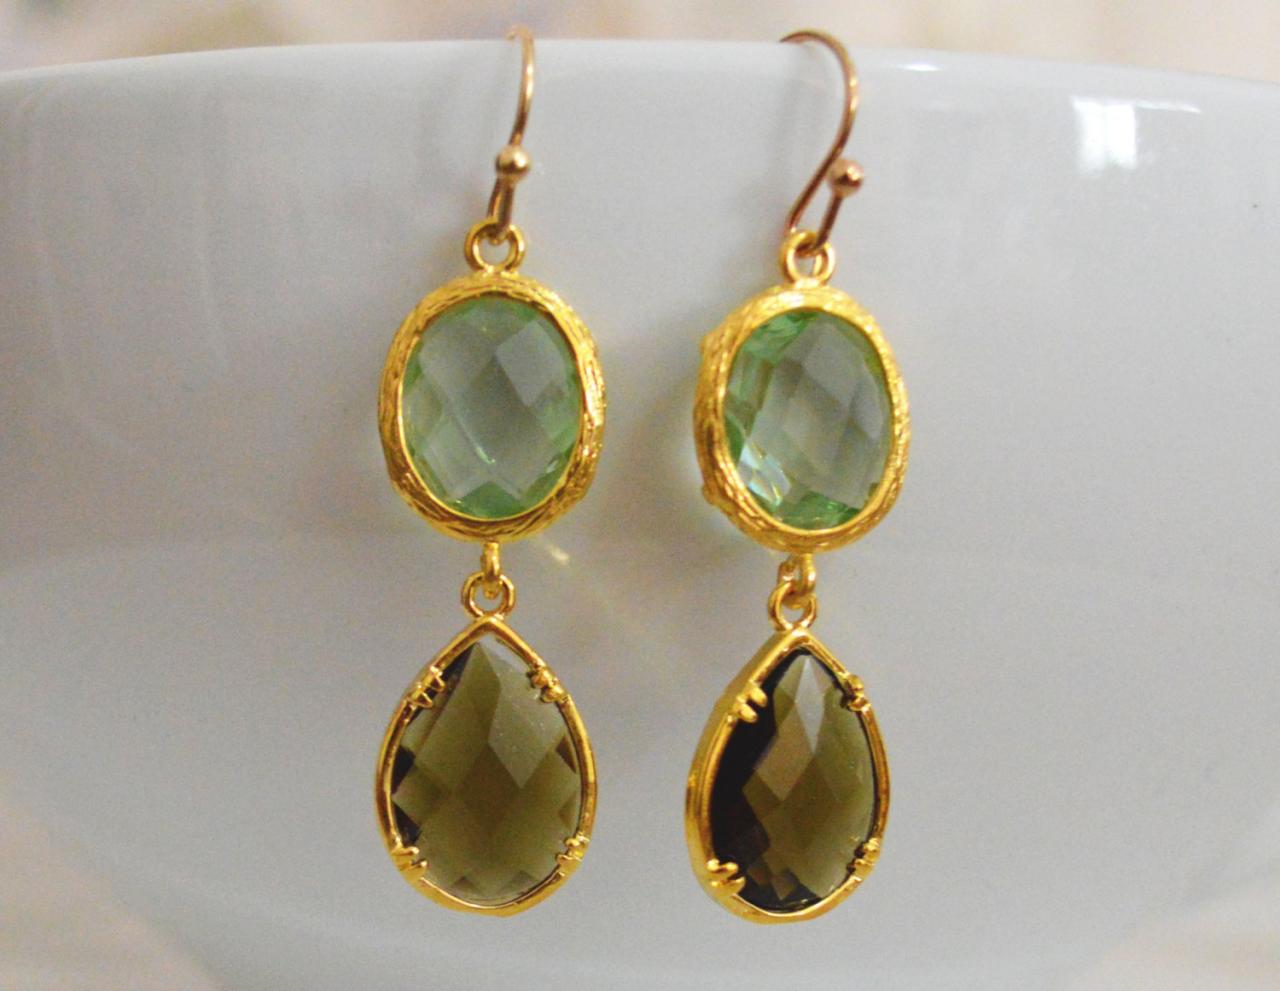 Glass Drop Earrings, Chrysolite & Morion Drop Earrings, Dangle Earrings, Gold Plated Earrings/bridesmaid Gifts/everyday Jewelry/